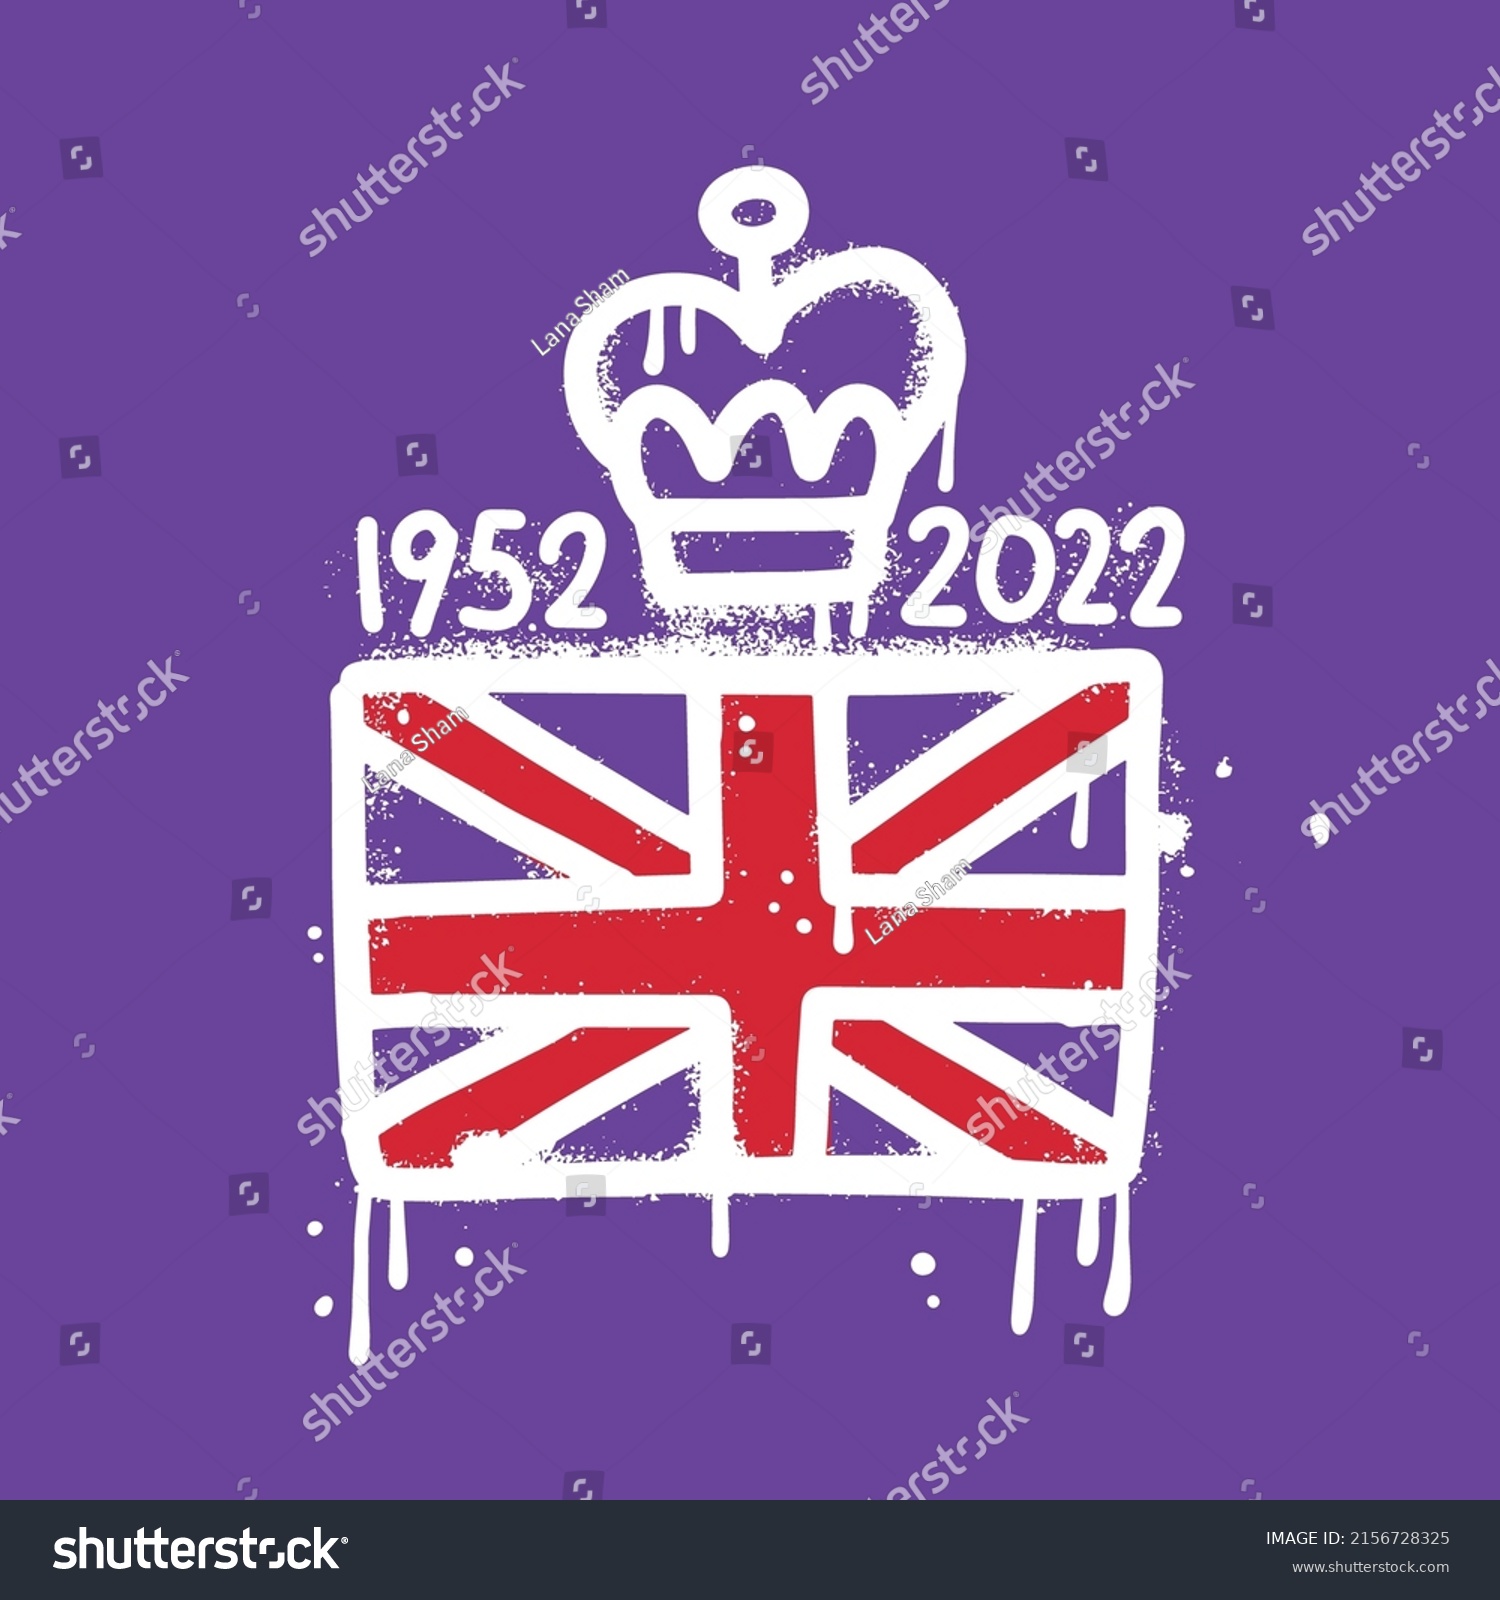 SVG of Urban graffiti for Queen. Platinum Jubilee 1952-2022 with British flag and crown. Ready greeting card for celebrate. Design for banner, sticker, badge, flyer, brochure. Vector textured hand drawn svg